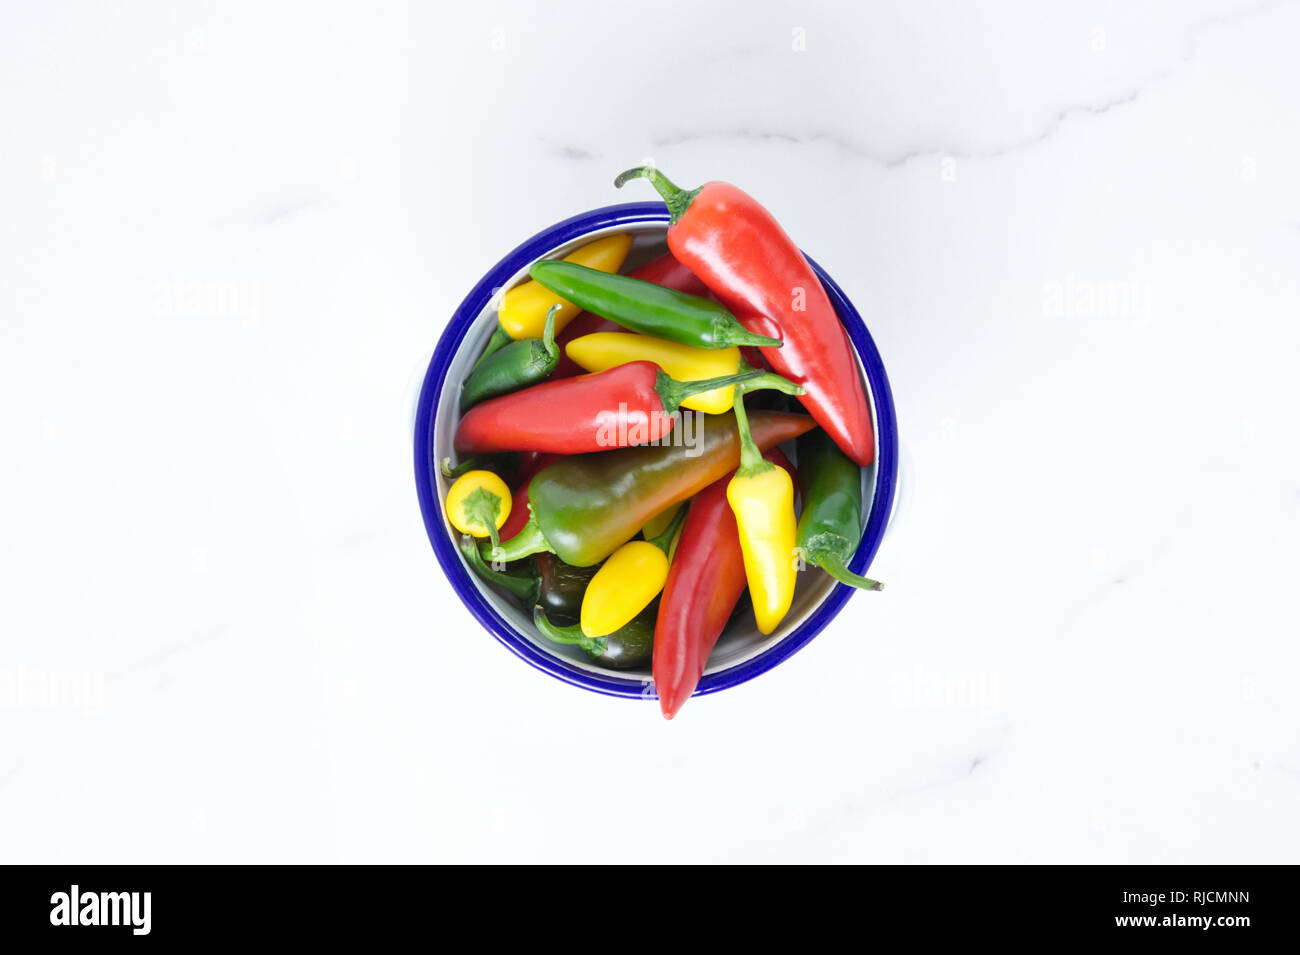 Capsicum annuum. Chillies in an enamel bowl on a marble surface. Stock Photo